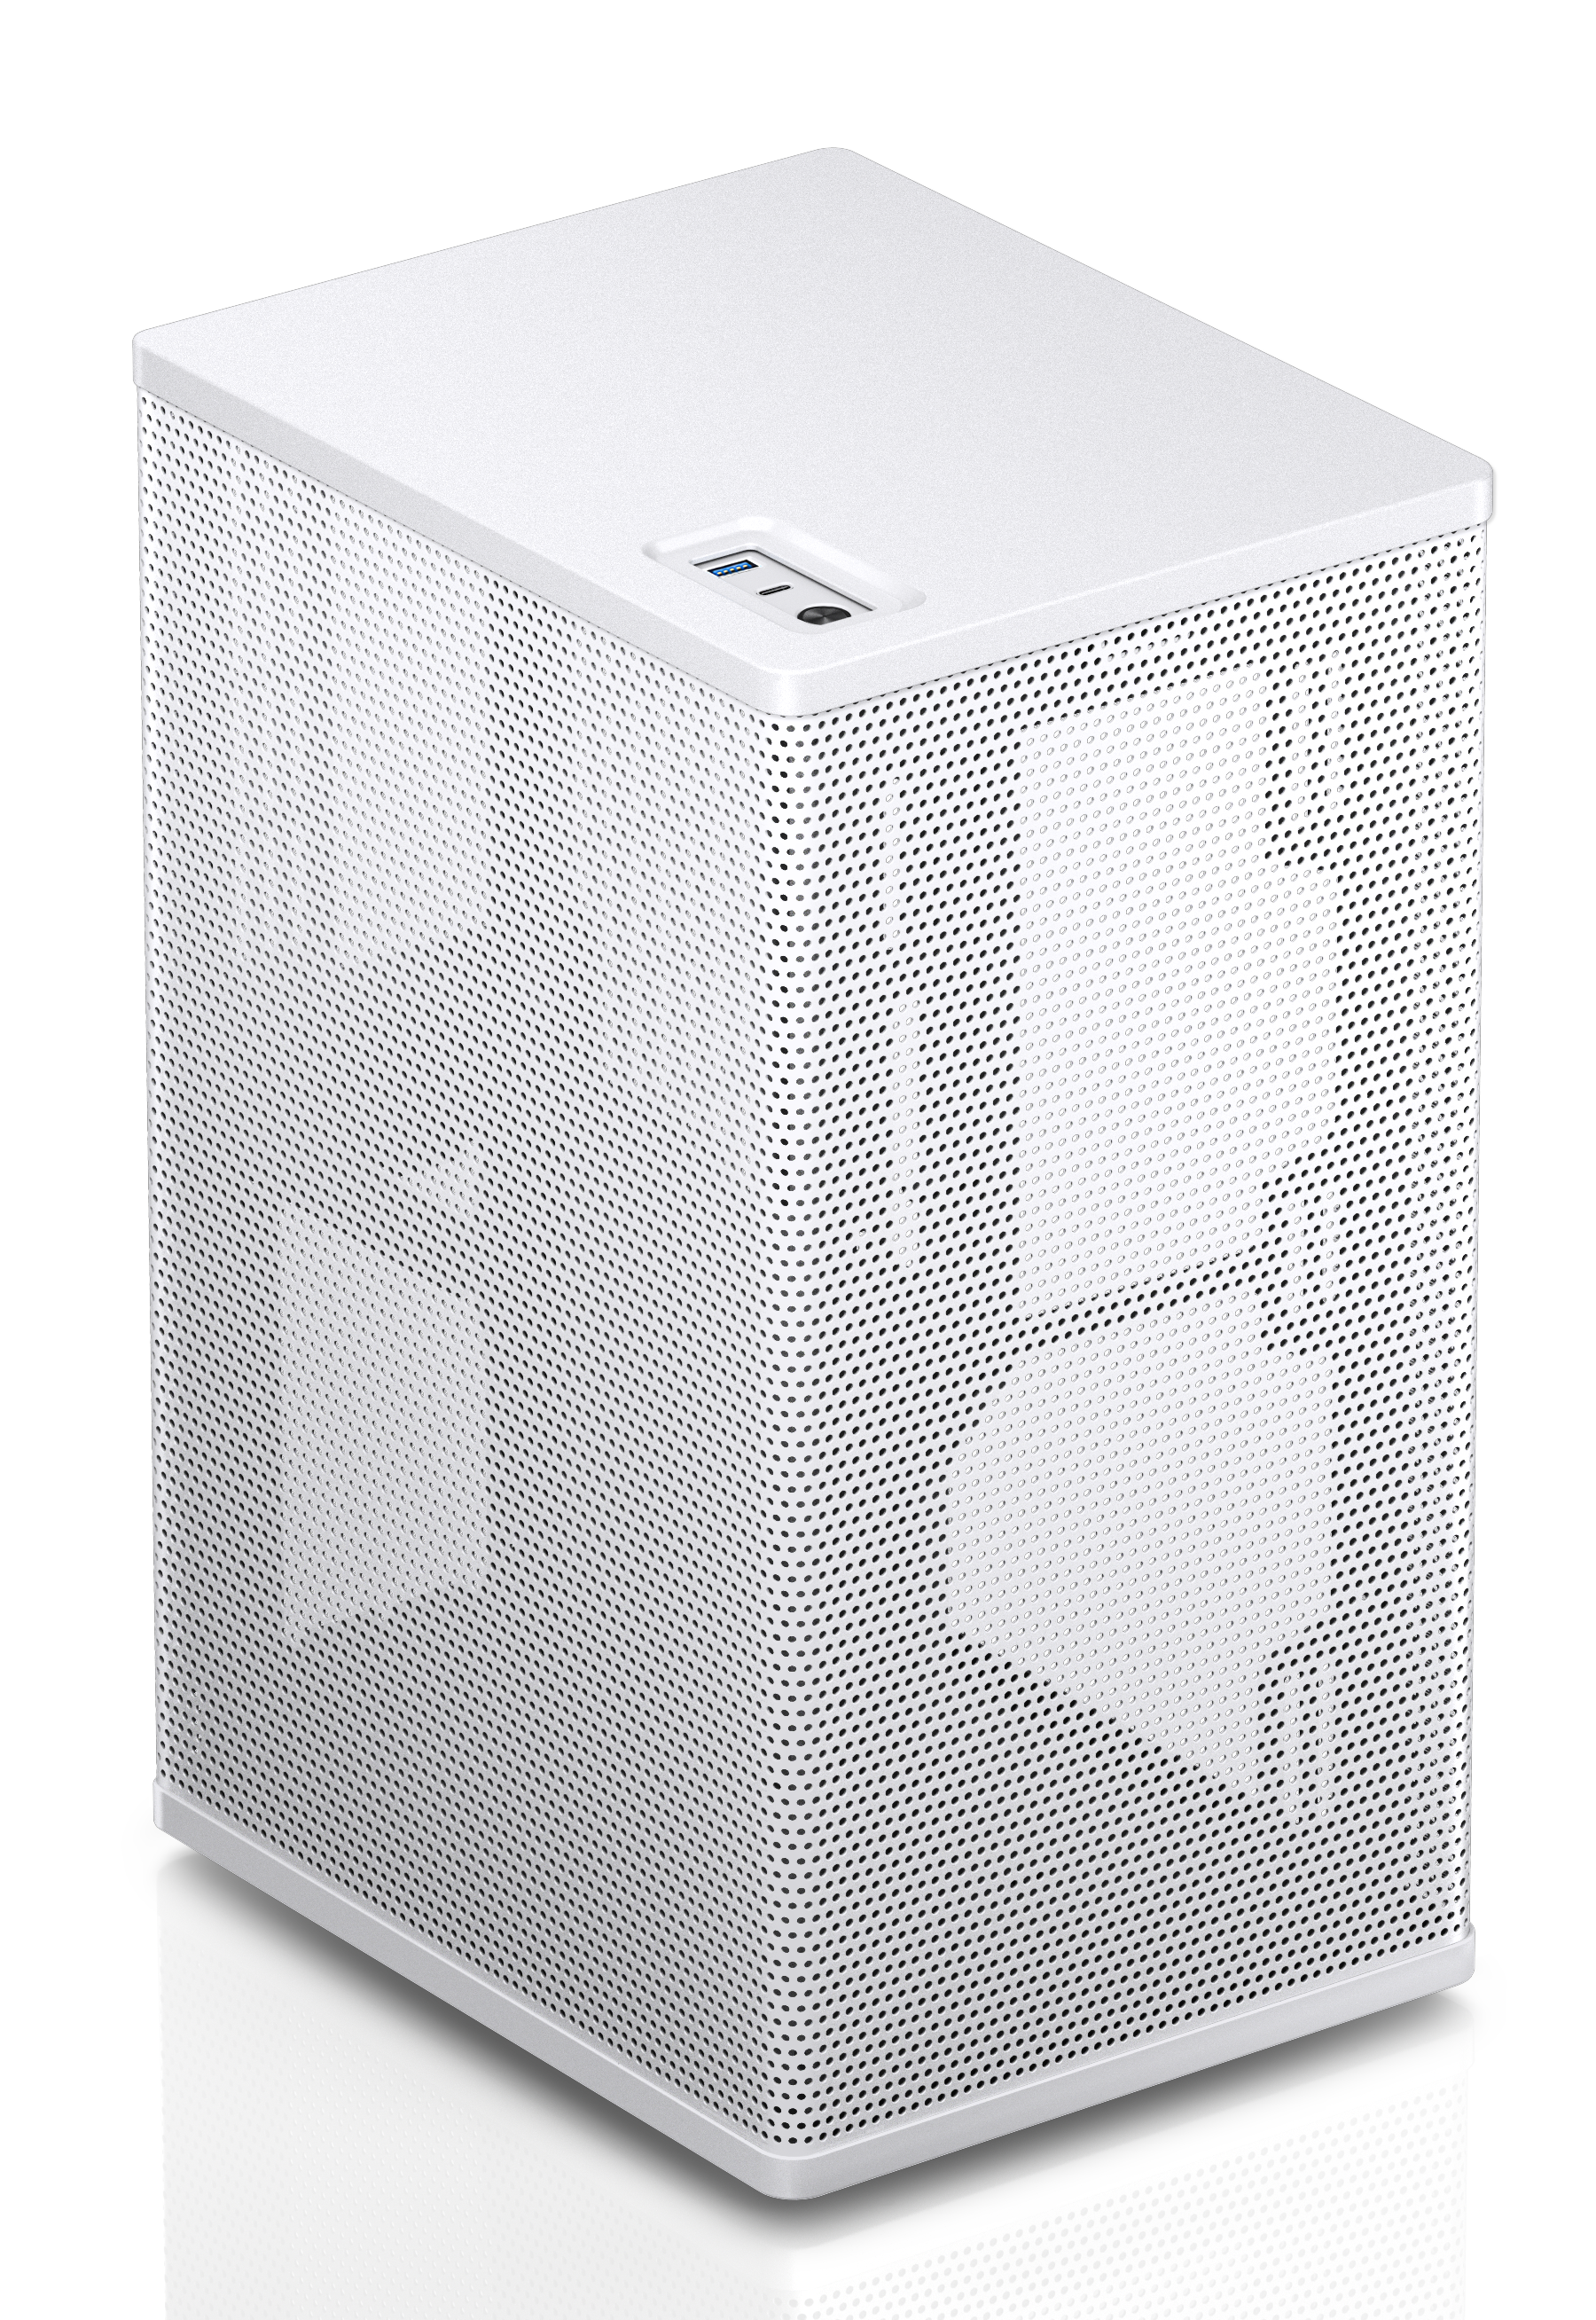 Jonsbo VR3 Mini-ITX PC Case – White with PCIe 4.0 Riser Cable